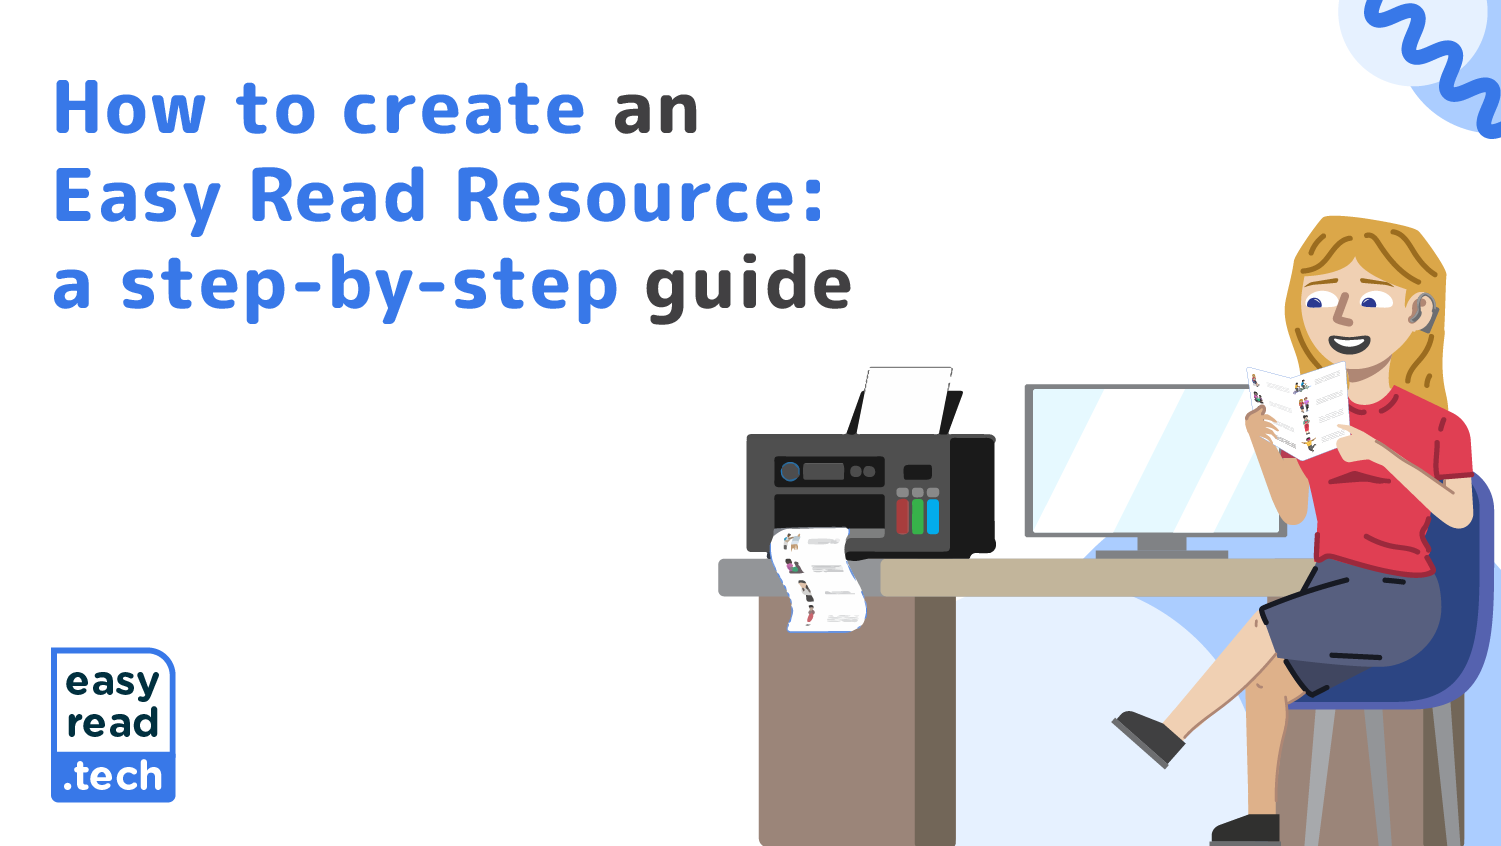 How to create an Easy Read resource: a step-by-step guide